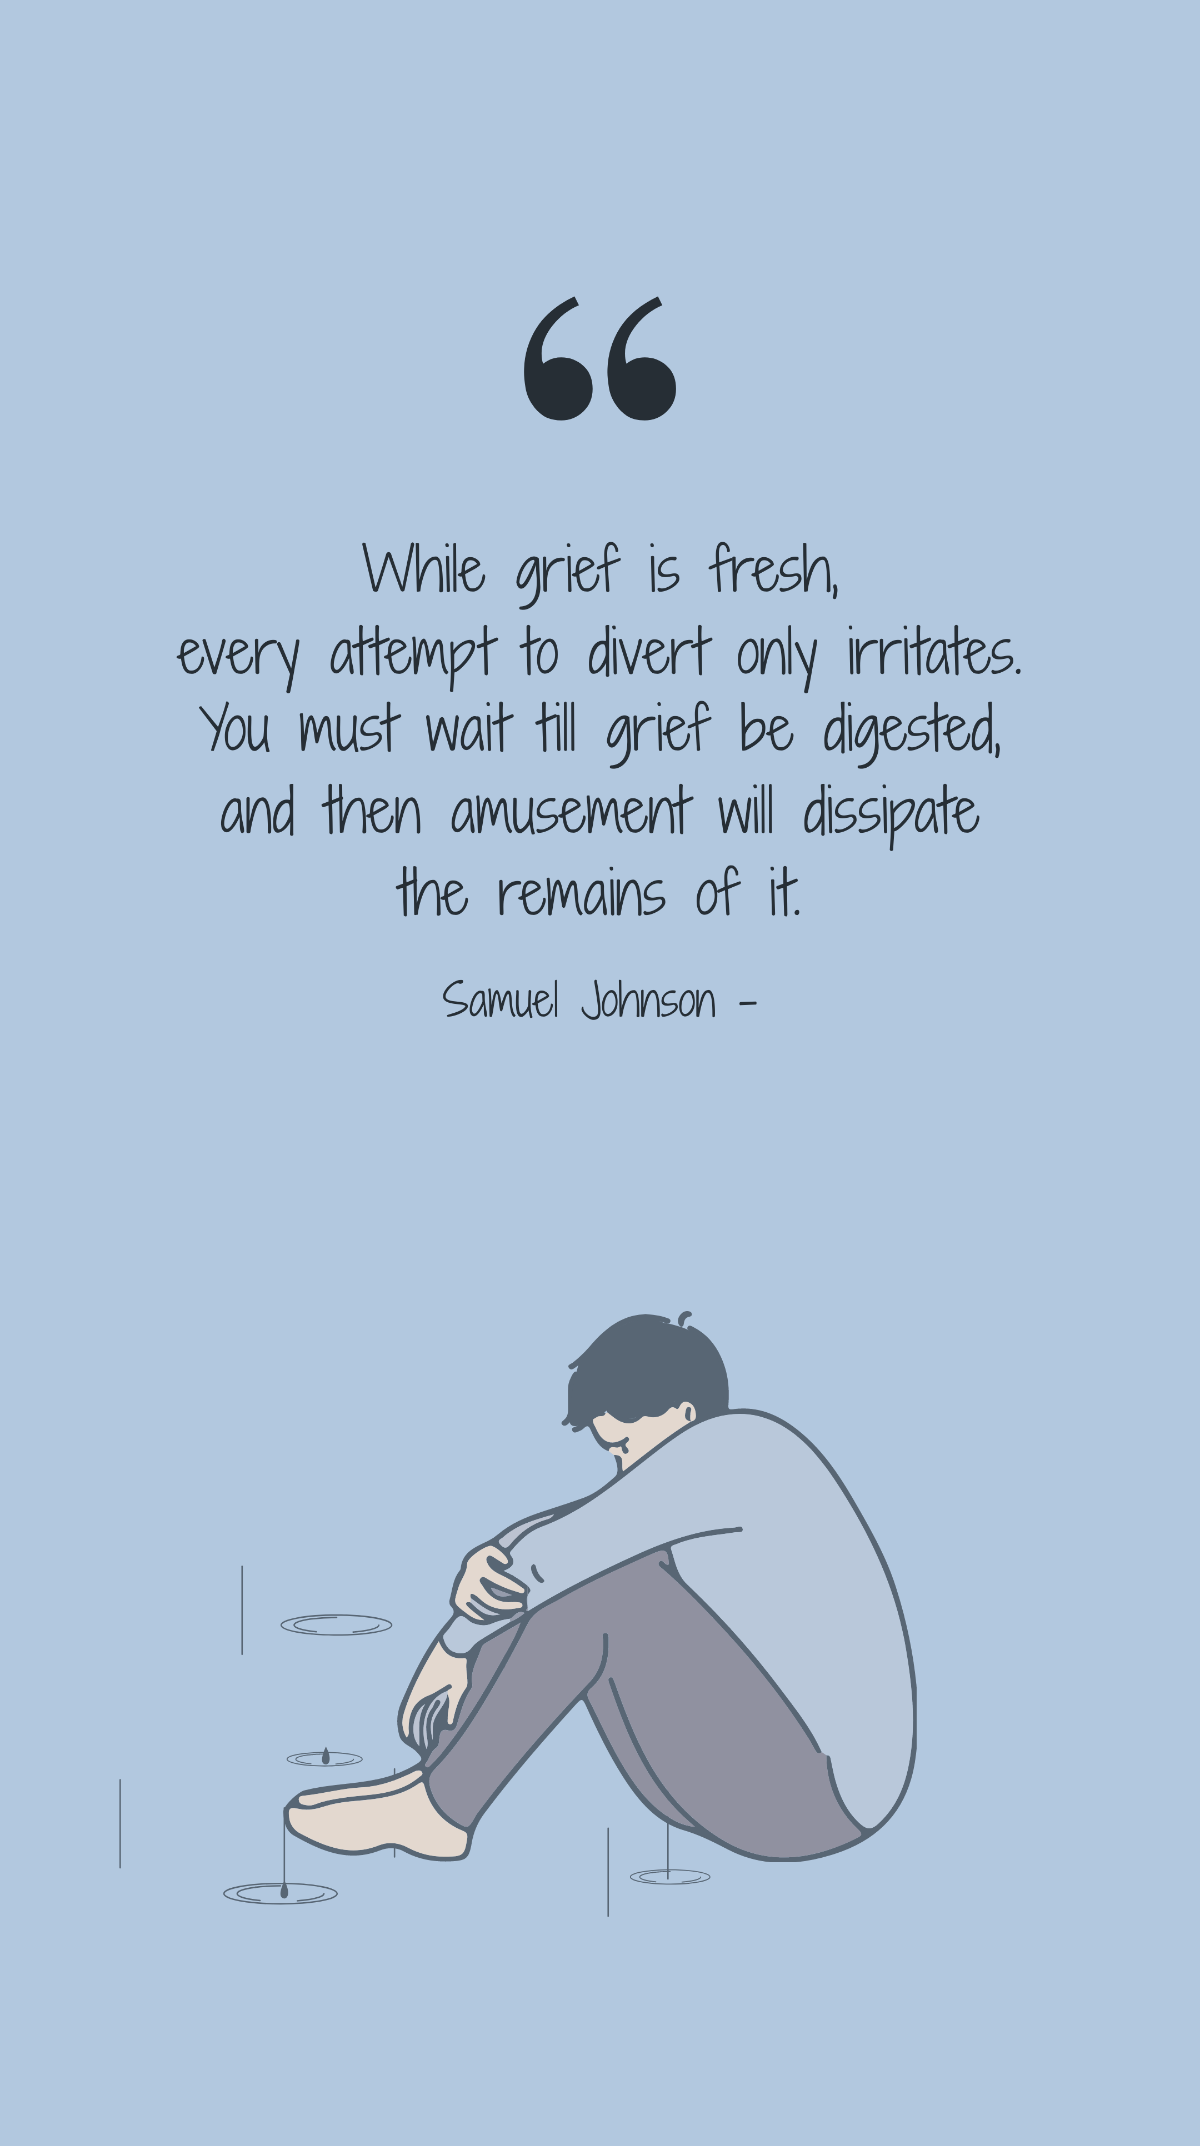 Free Samuel Johnson - While grief is fresh, every attempt to divert only irritates. You must wait till grief be digested, and then amusement will dissipate the remains of it. Template